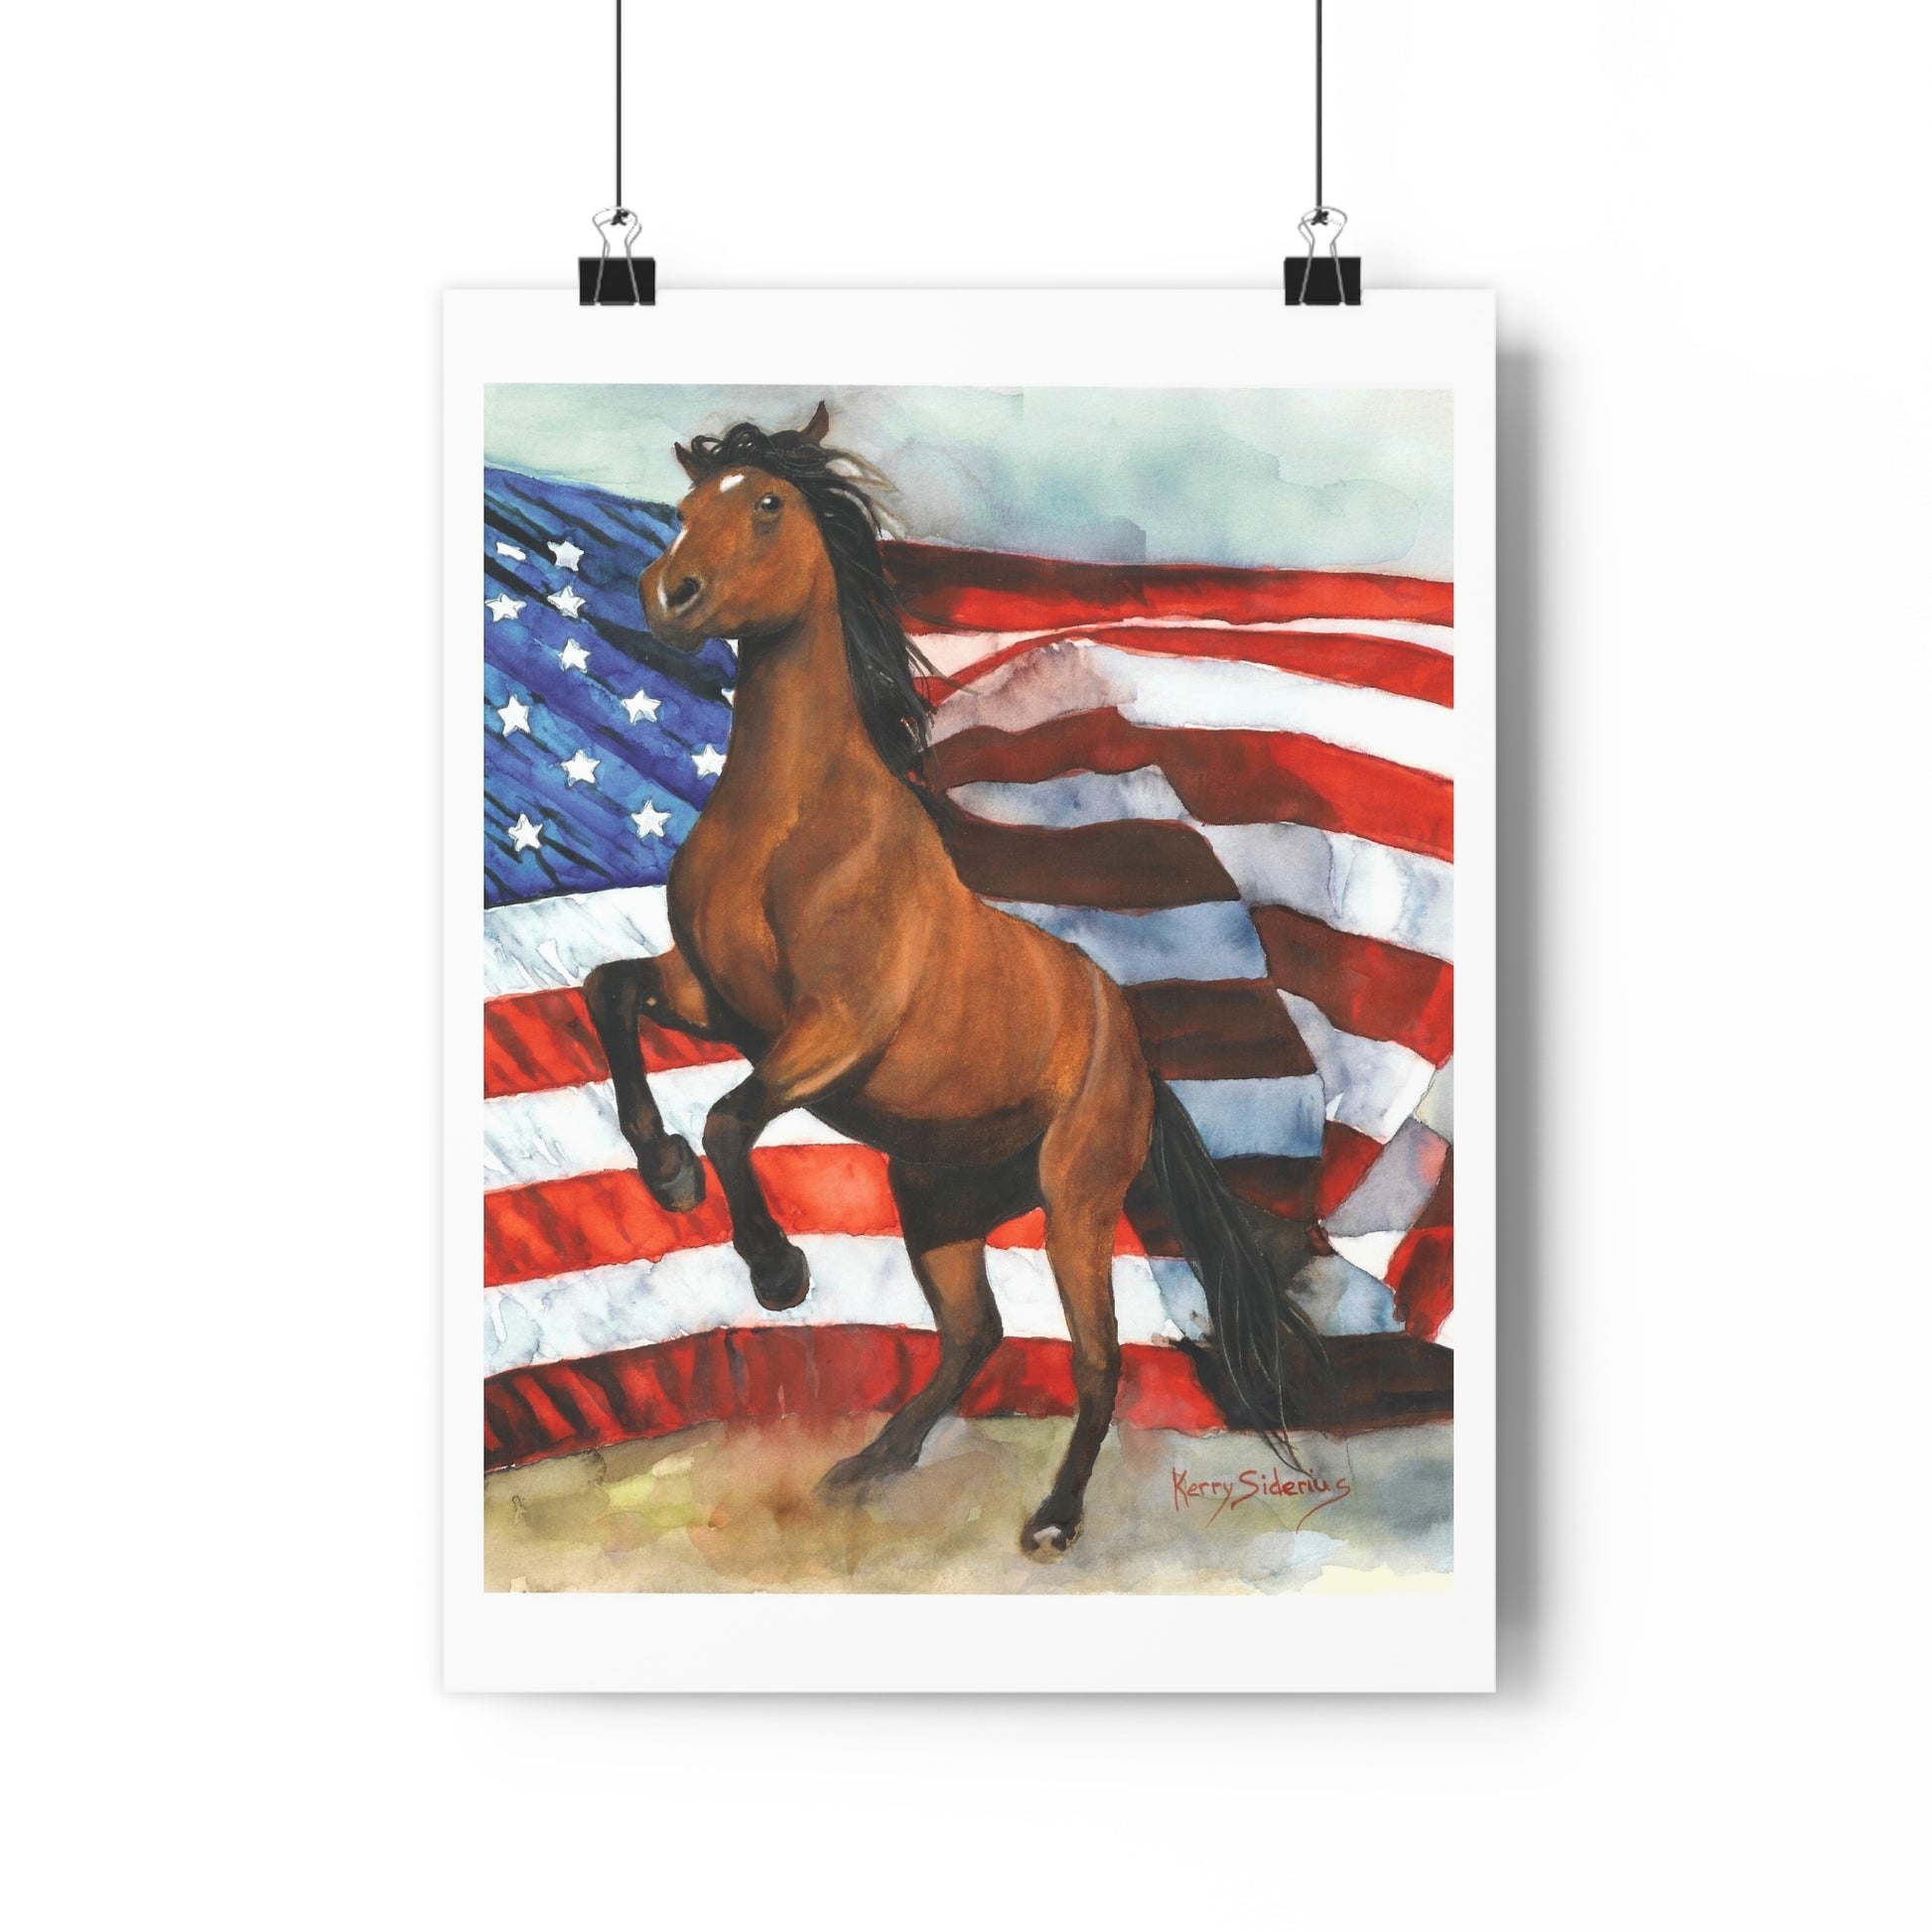 "Sorrel Horse with American Flag" Archival Print - Kerry Siderius Art 